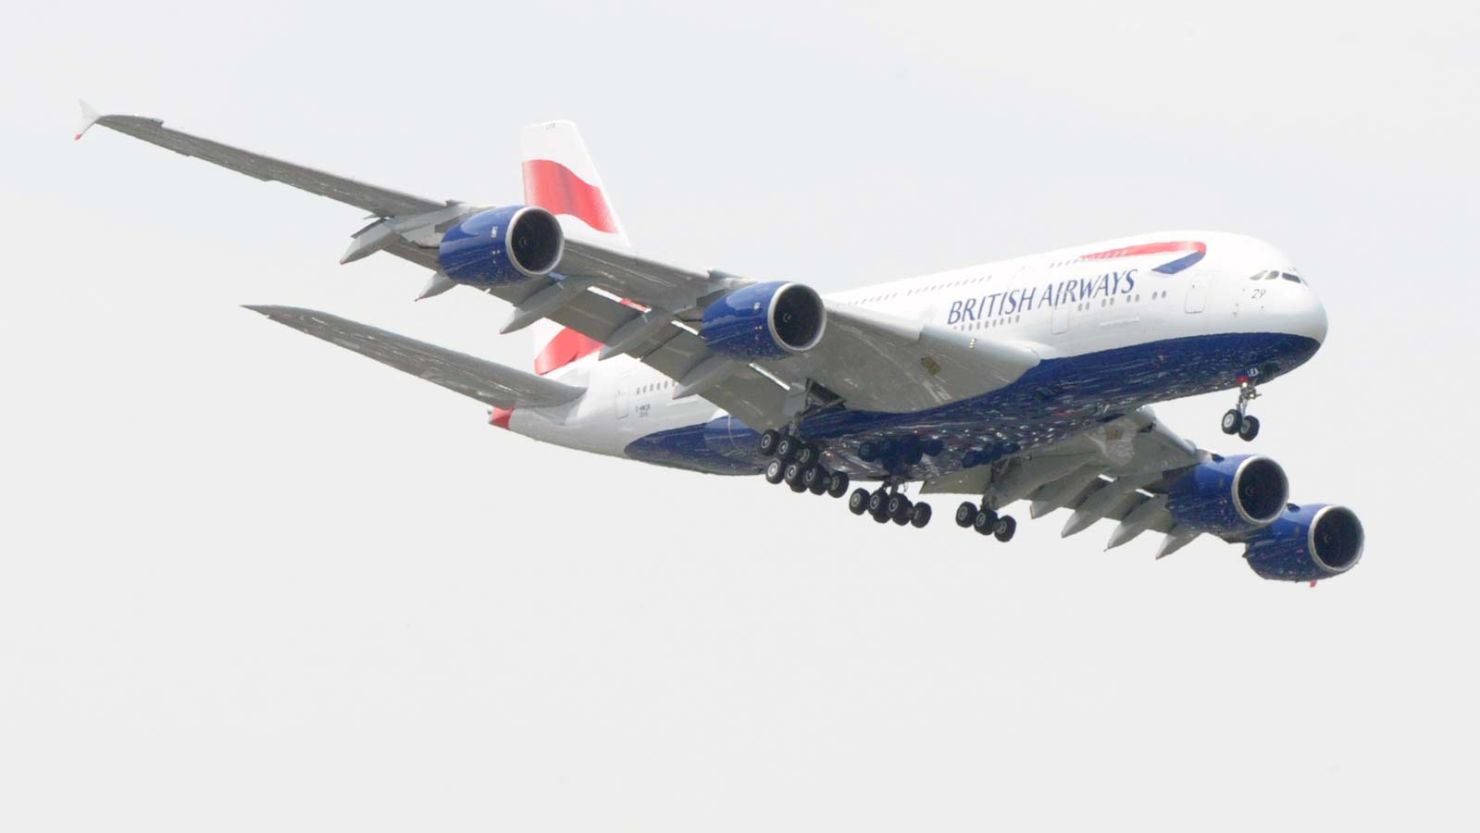 The Airbus A380 wearing the British Airways colors performs its flying display at Le Bourget airport, near Paris on June 19, 2013 during the 50th International Paris Air show. AFP PHOTO ERIC PIERMONT (Photo credit should read ERIC PIERMONT/AFP/Getty Images)